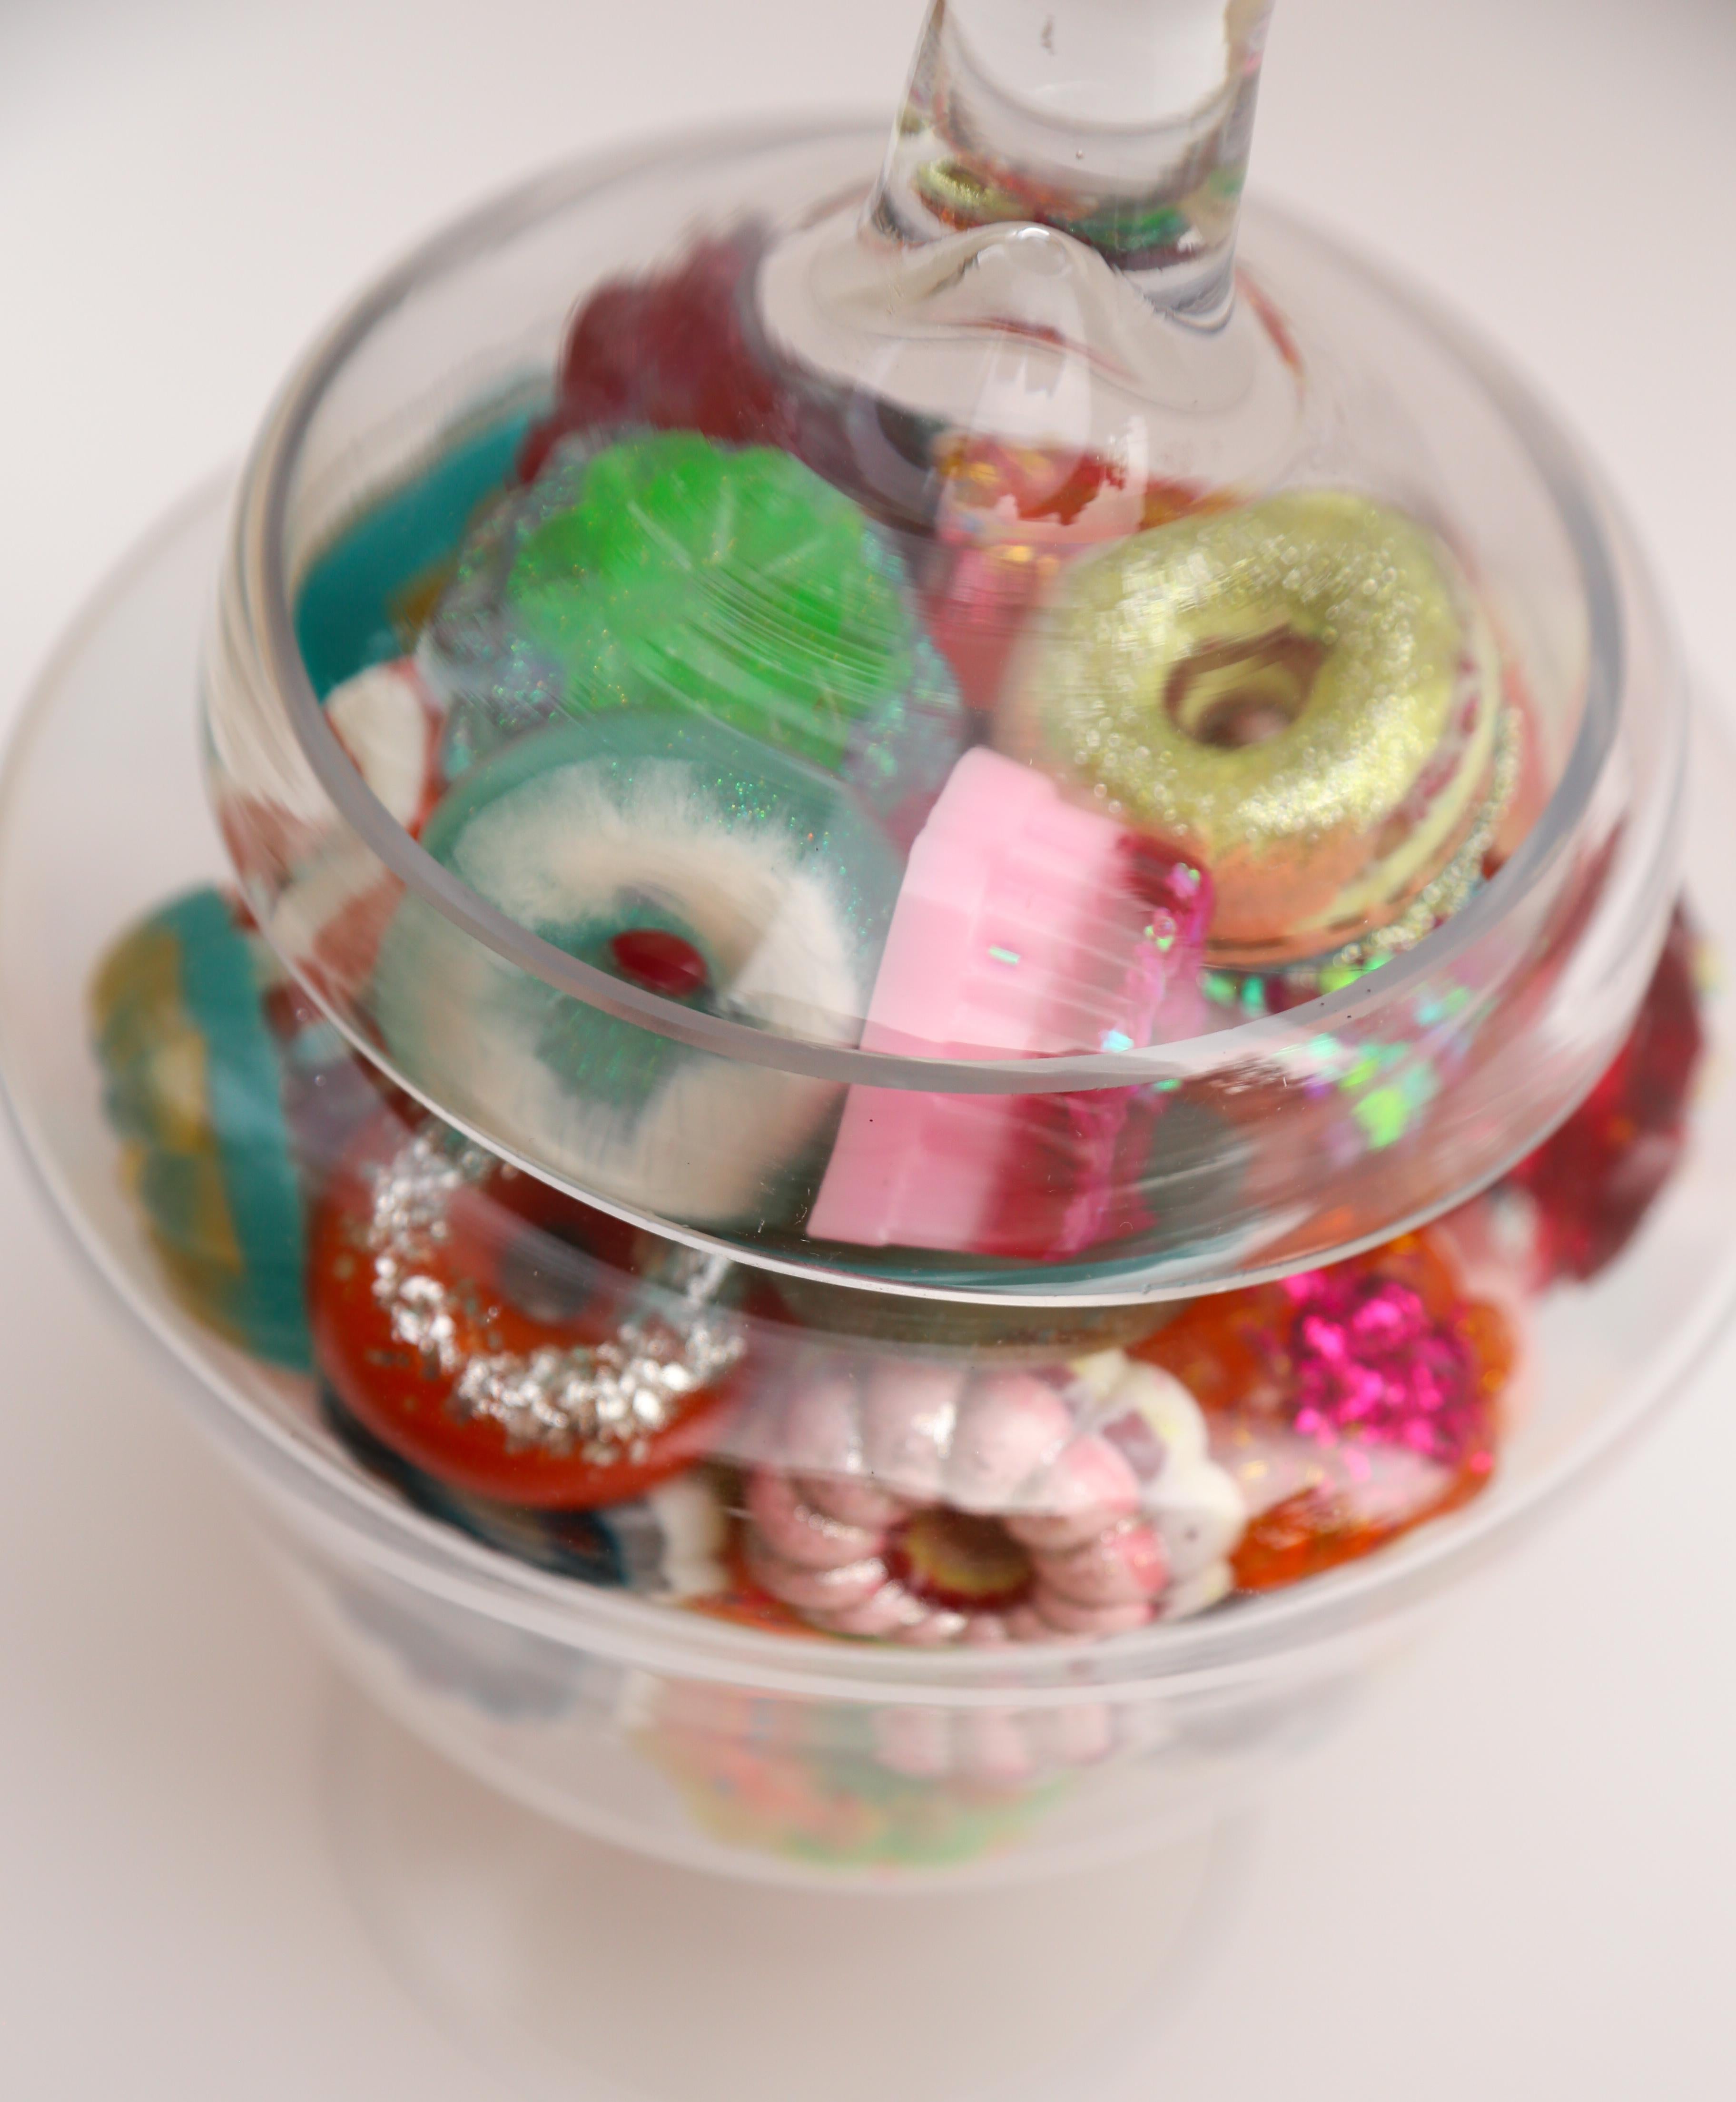 Donut Jar - Handmade Mini Resin Donuts in Glass Candy Jar / colorful  - Beige Still-Life Sculpture by Betsy Enzensberger